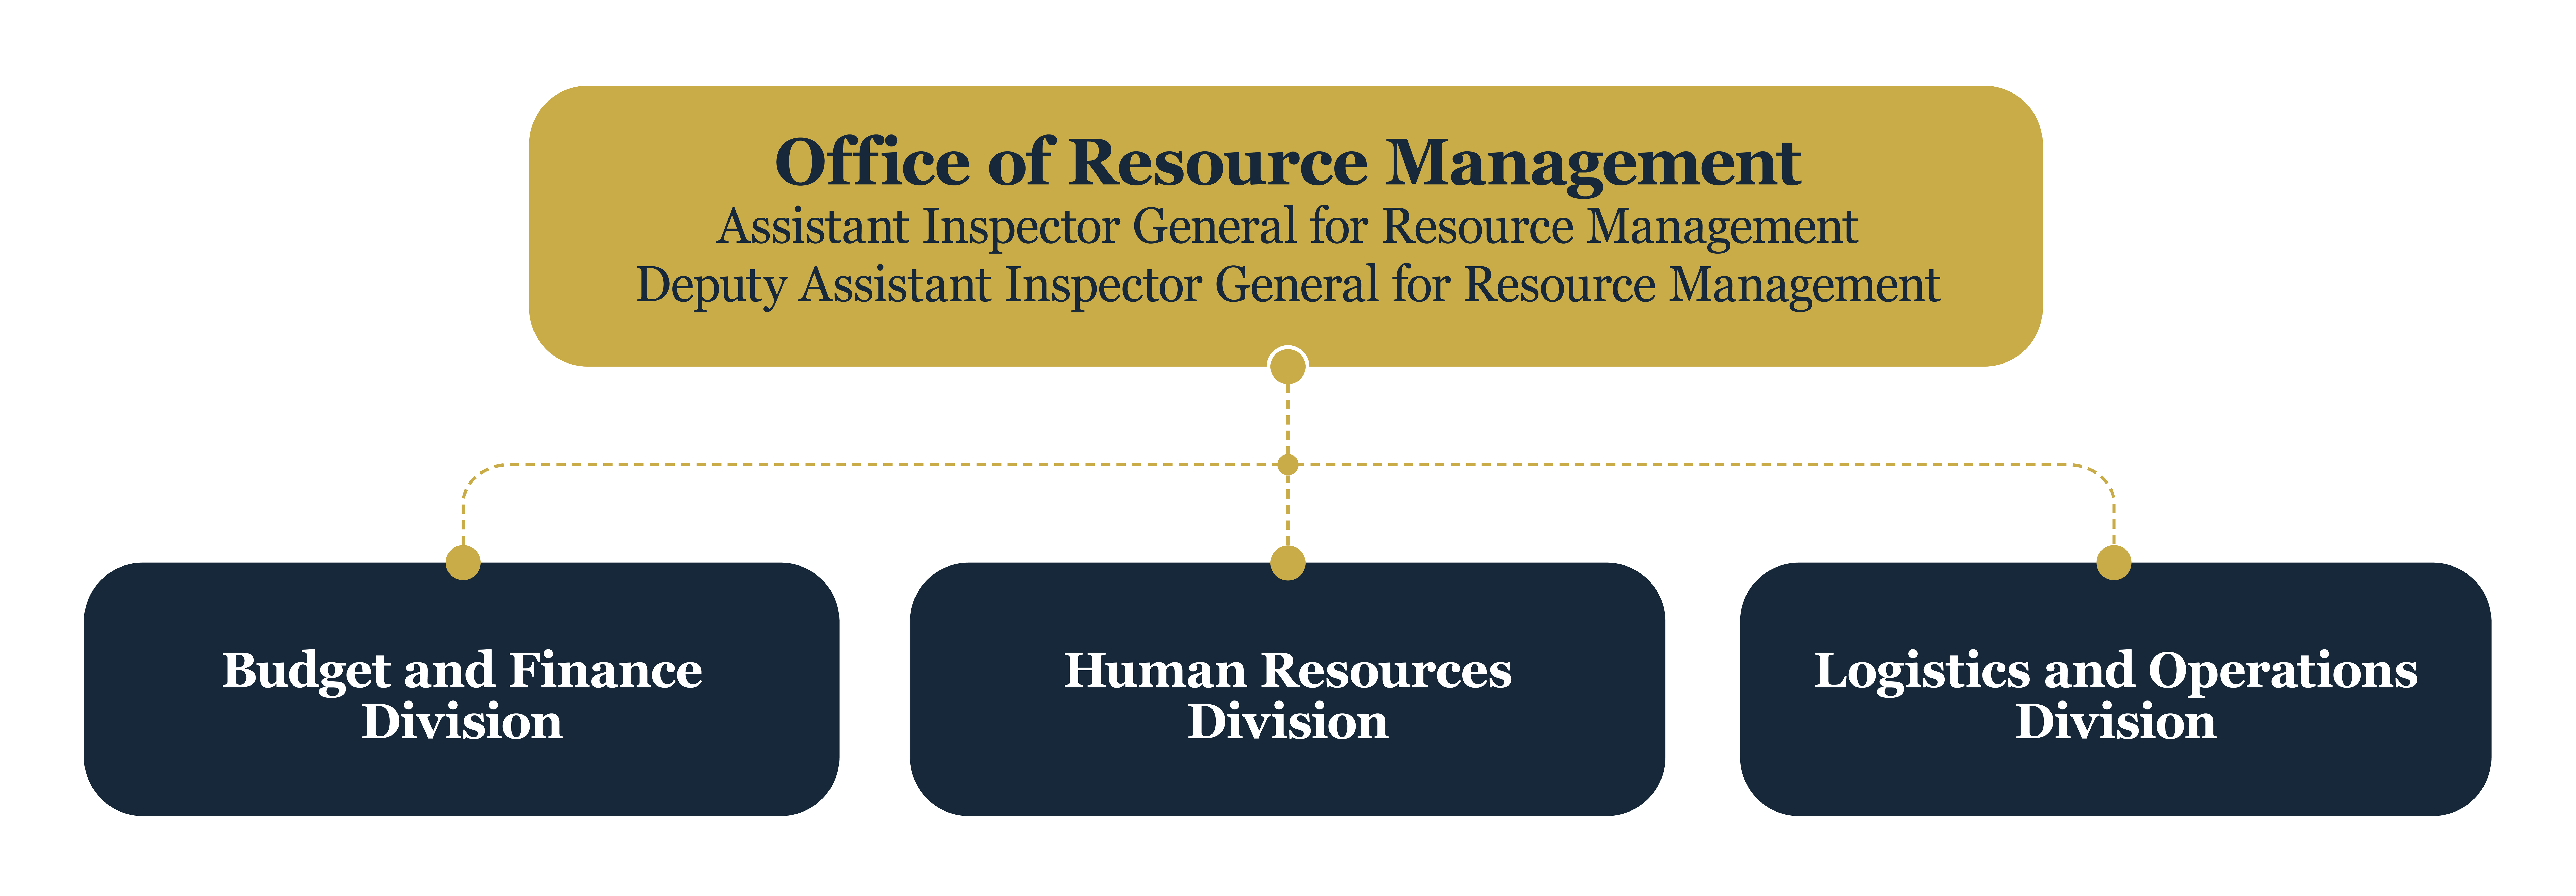 office of resource management